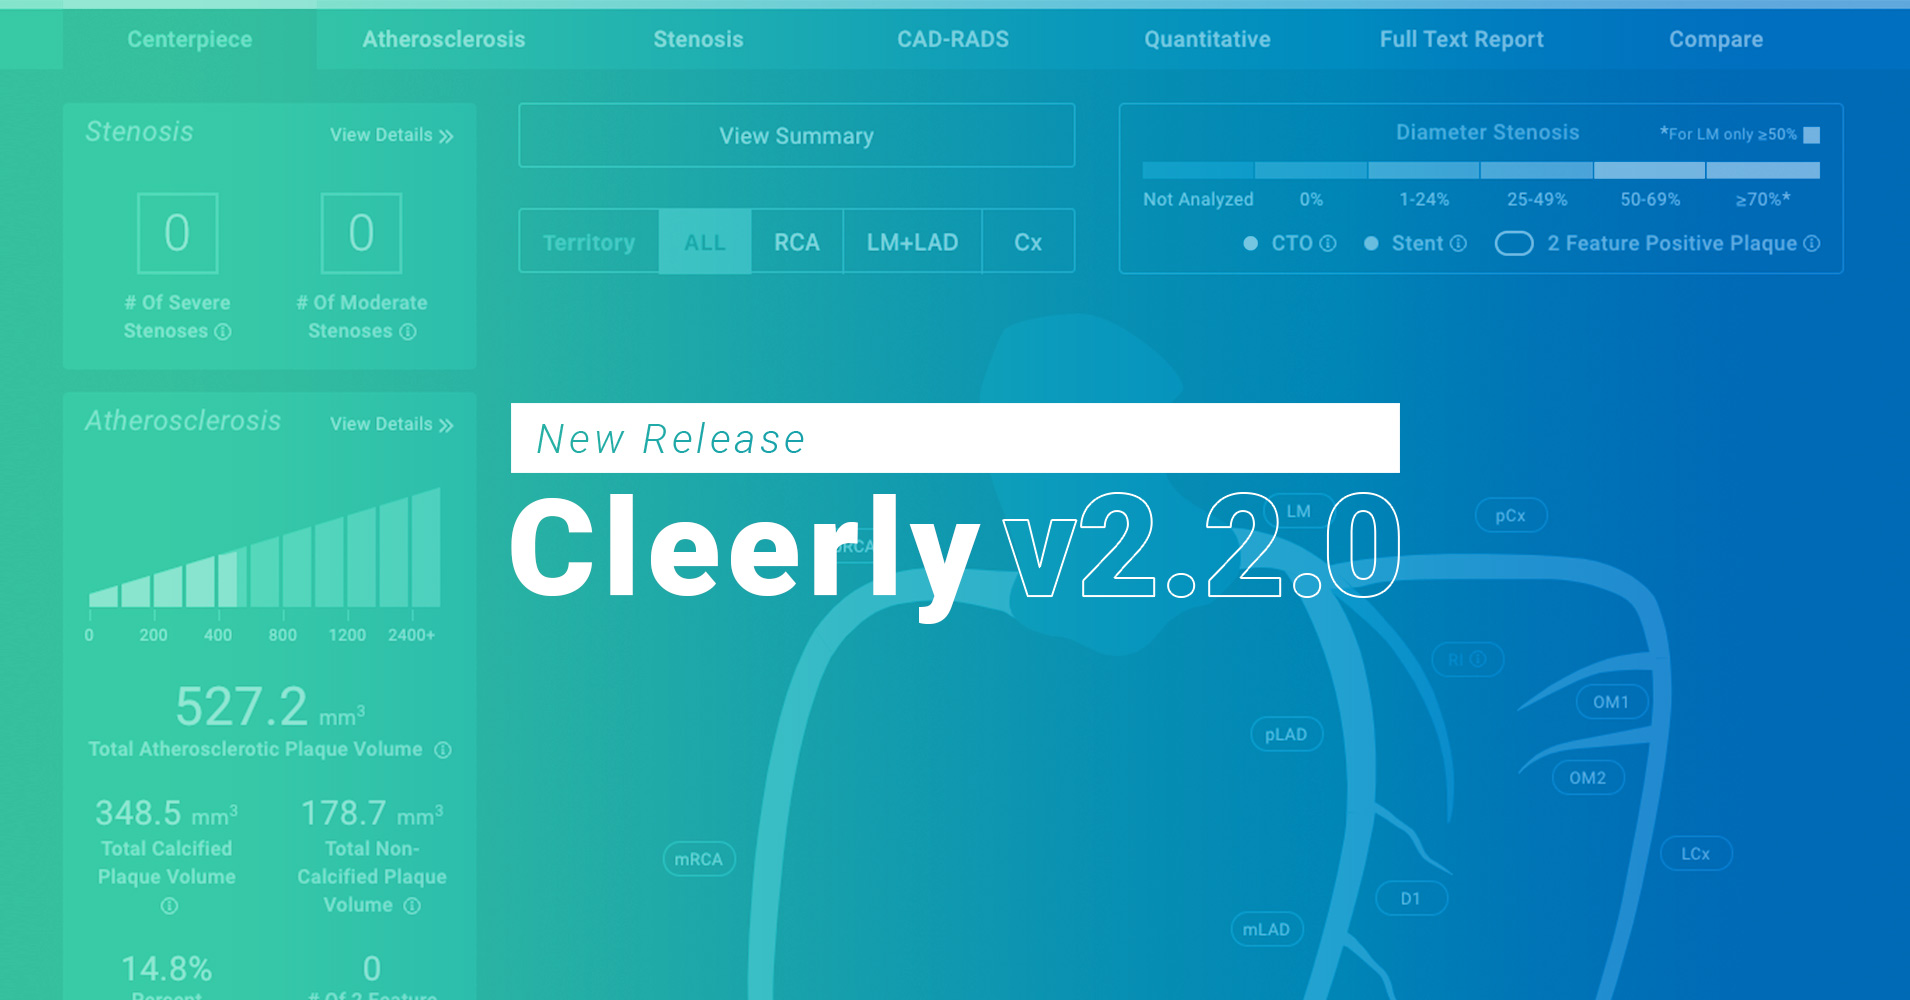 Cleerly Product Release: Taking Precision Heart Care to the Next Level